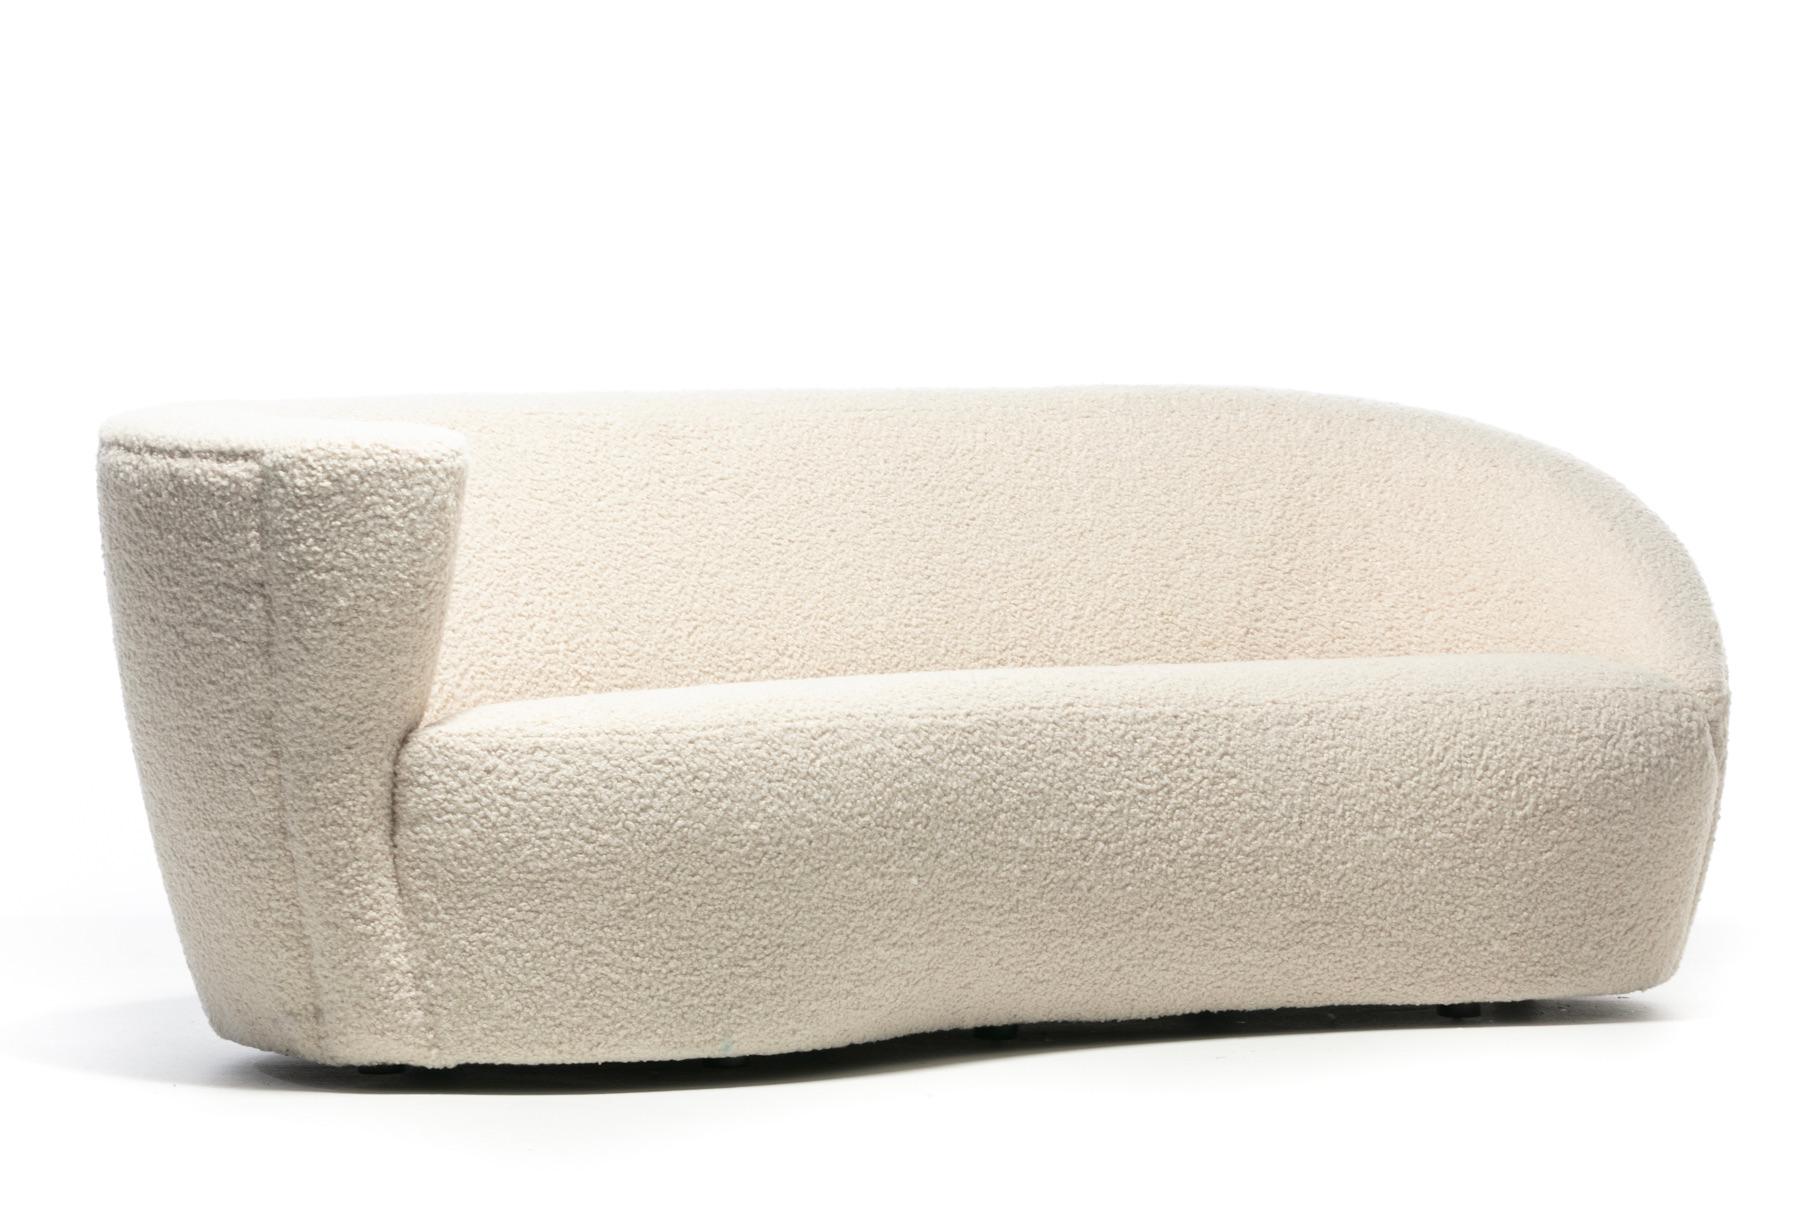 Vladimir Kagan Nautilus Sofa in Ivory White Bouclé by Directional, c. 1990 For Sale 8